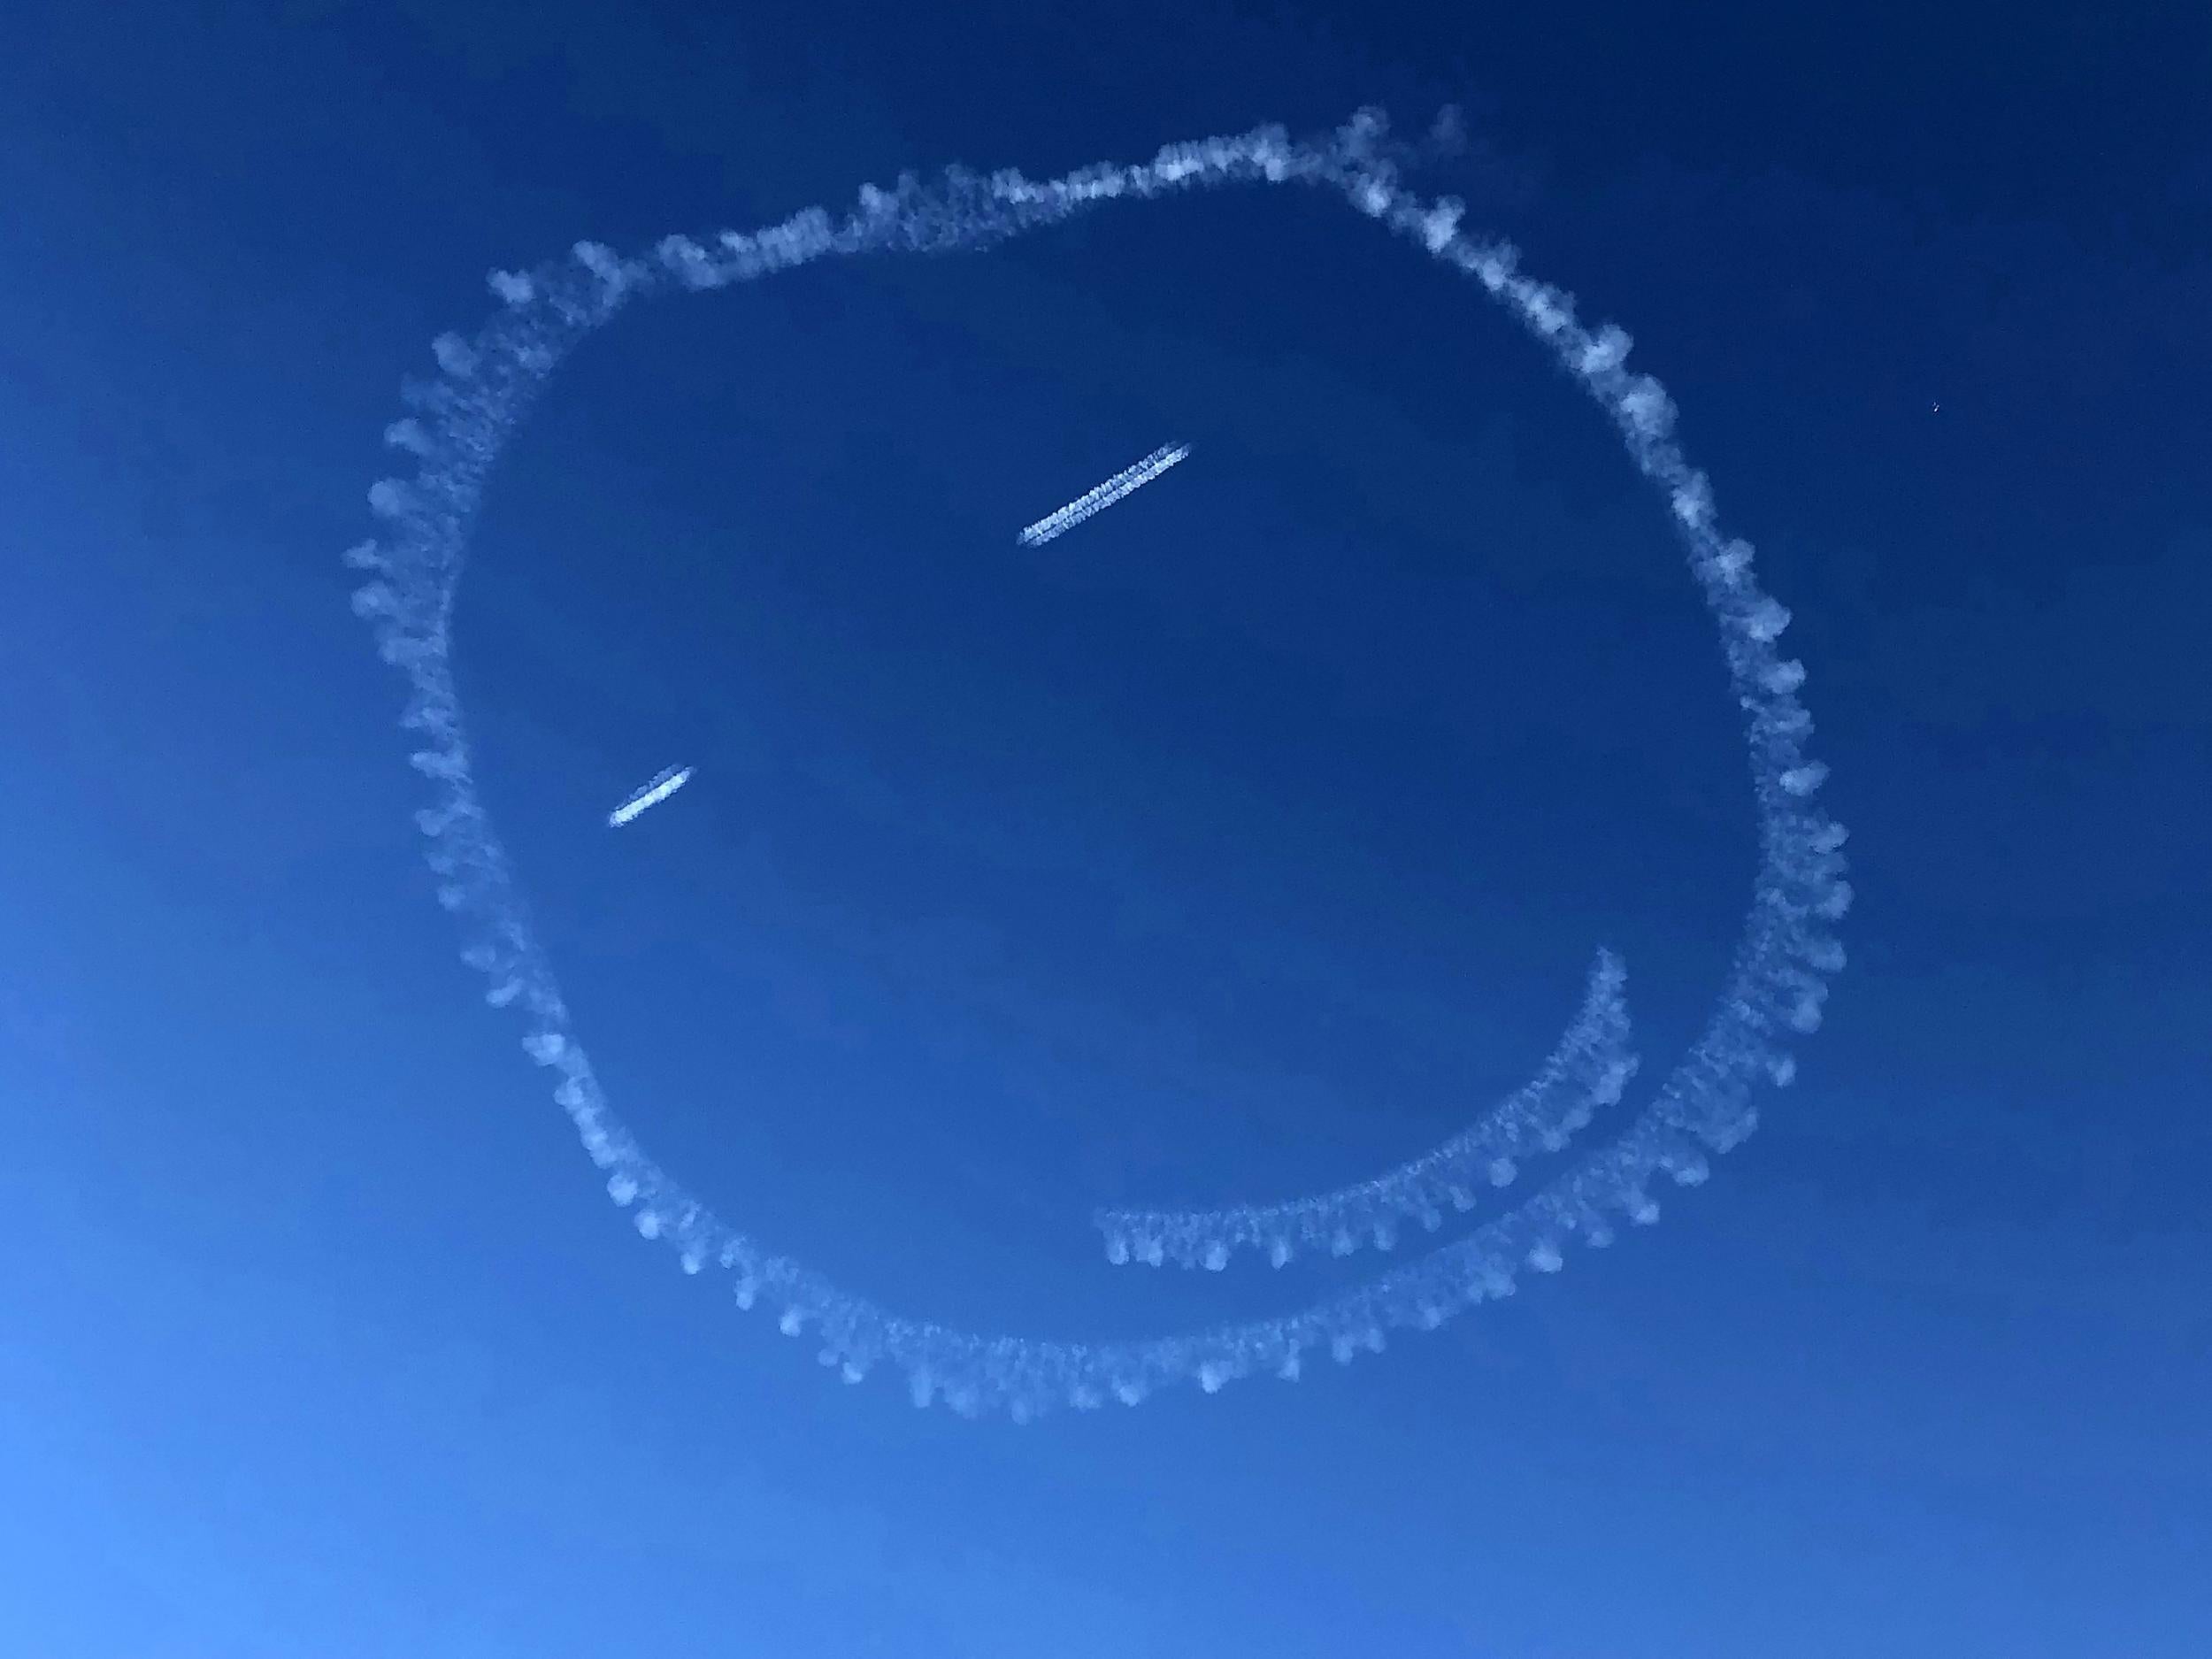 A pilot was on cloud nine when he drew this giant smiley face in the sky - using vapour from his plane's exhaust